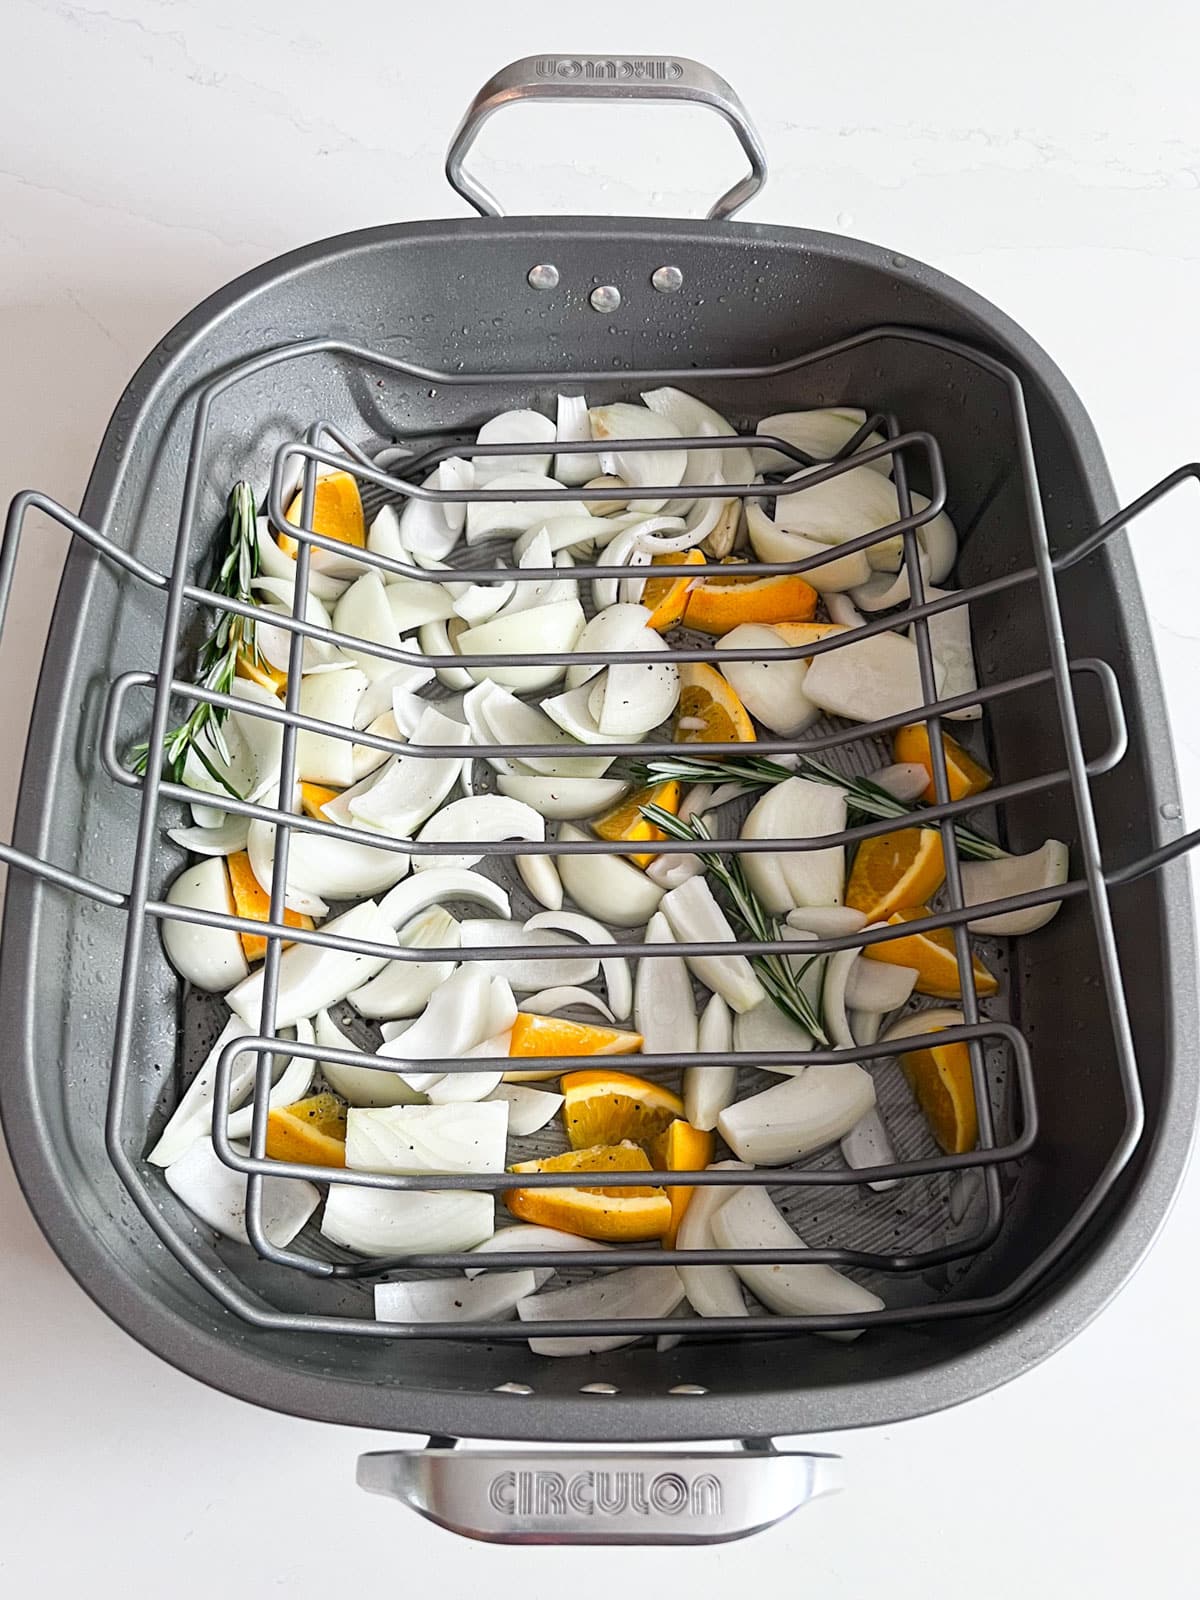 The prepared turkey pan of onions and oranges with a metal rack in it.